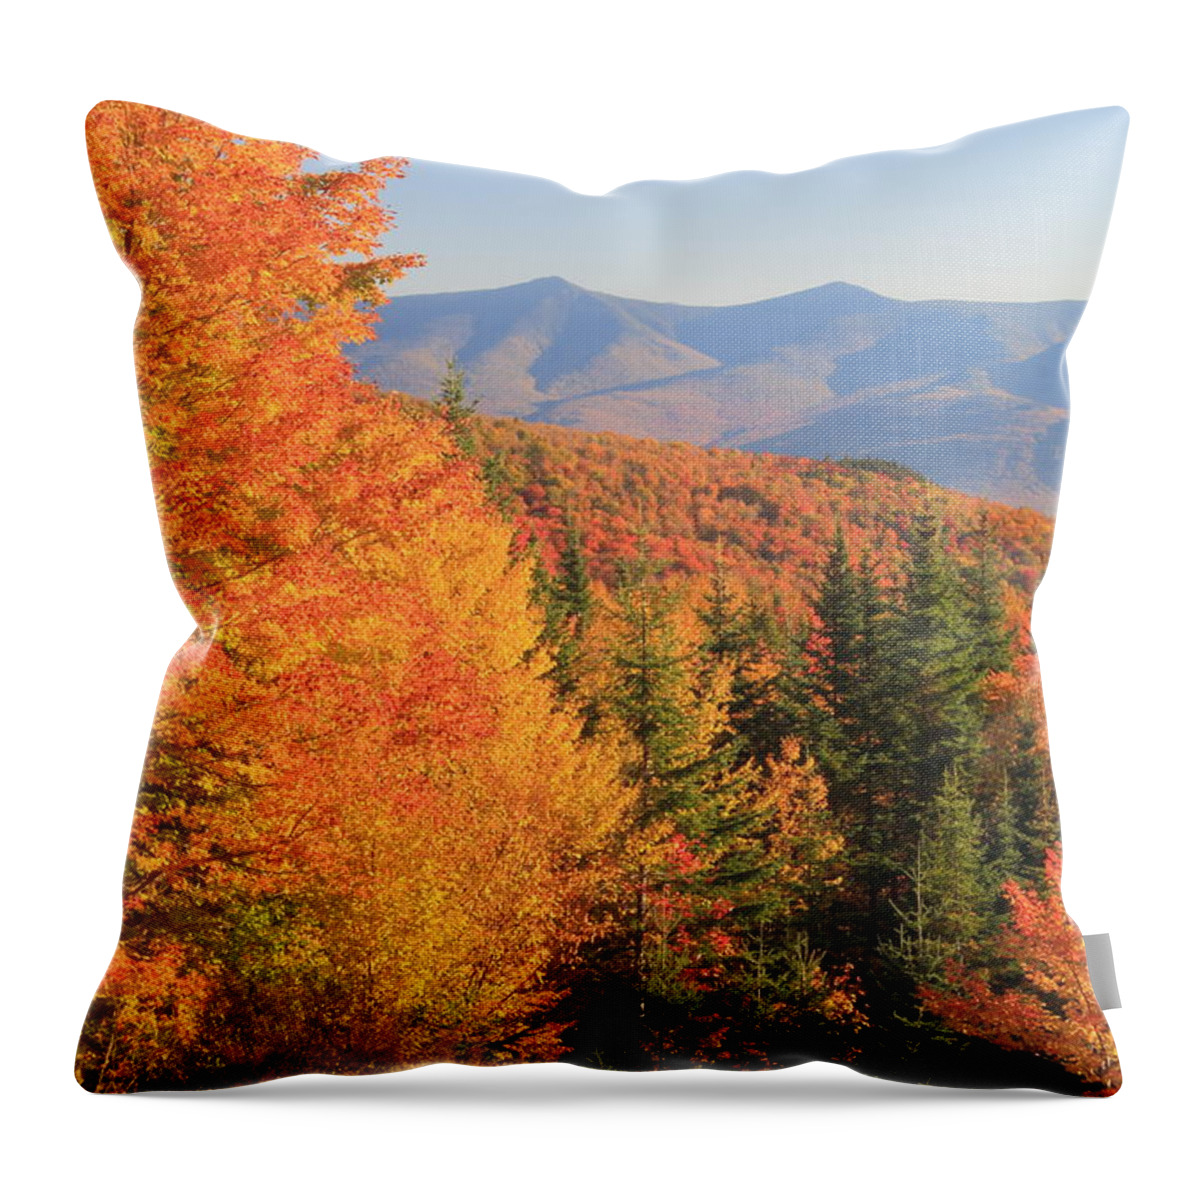 New Hampshire Throw Pillow featuring the photograph Lincoln Warren Road White Mountains Peak Fall Foliage by John Burk